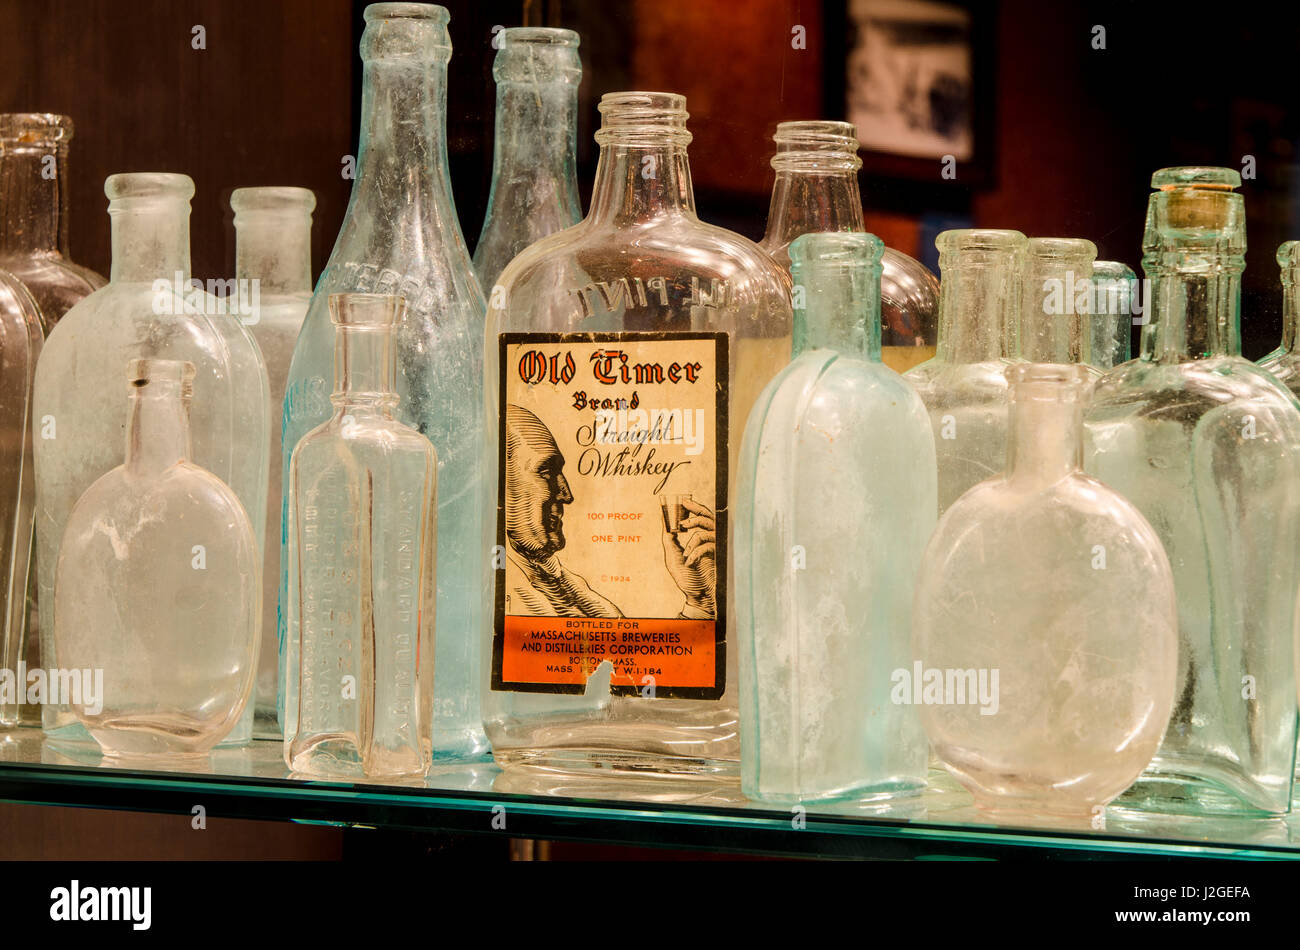 Exhibits and displays in The Mob Museum Las Vegas, Nevada. Stock Photo